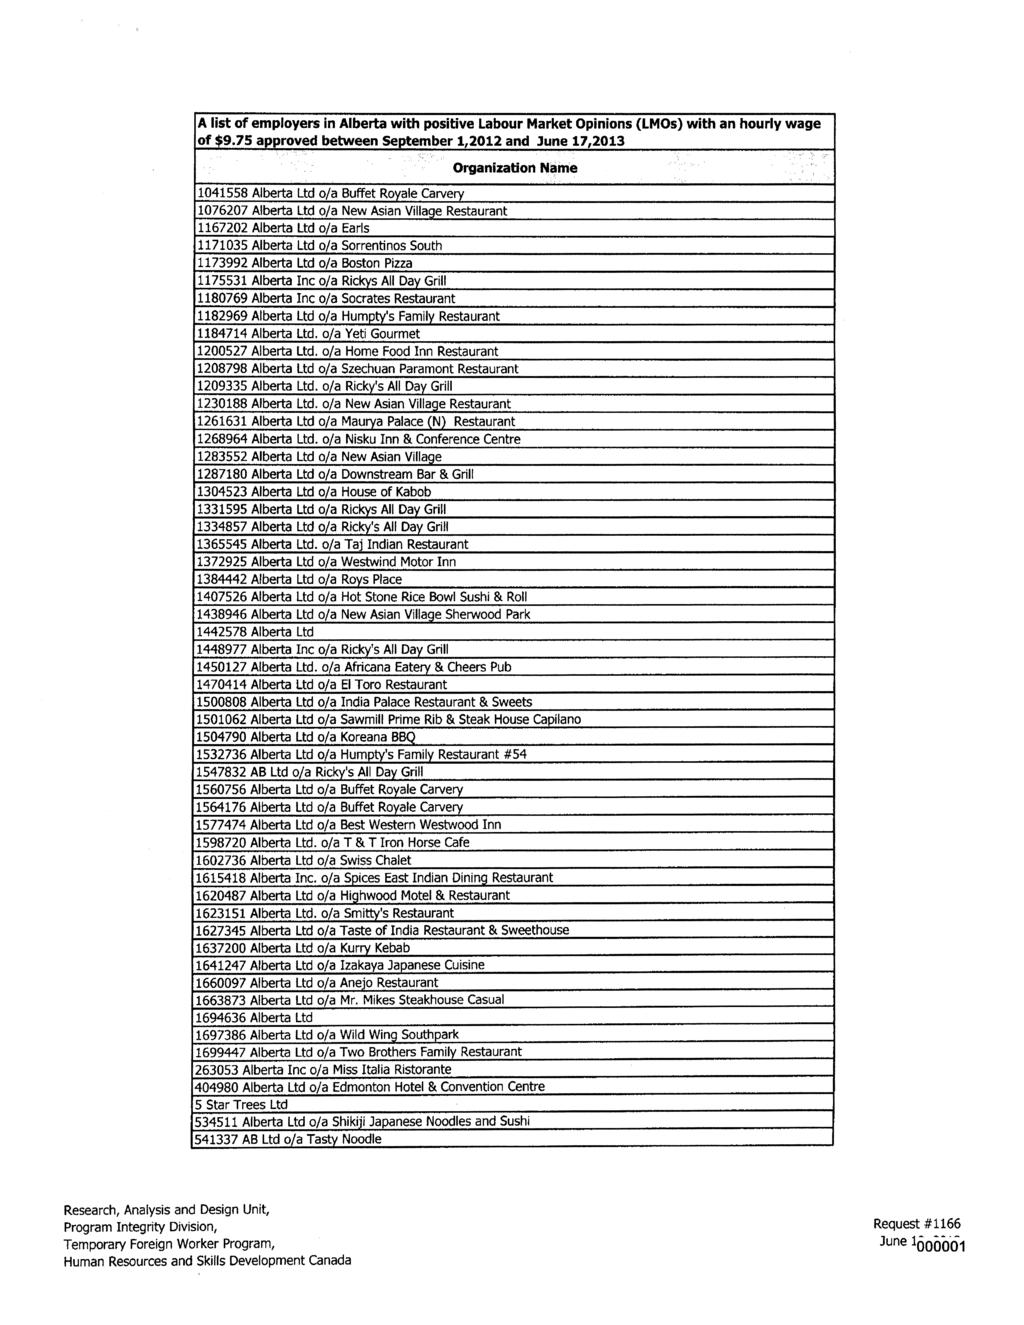 A list of employers in Alberta with positive Labour Market Opinions (LMOs) with an hourly wage of $9.75 approved between September 1,2012 and June 17,2013.'.